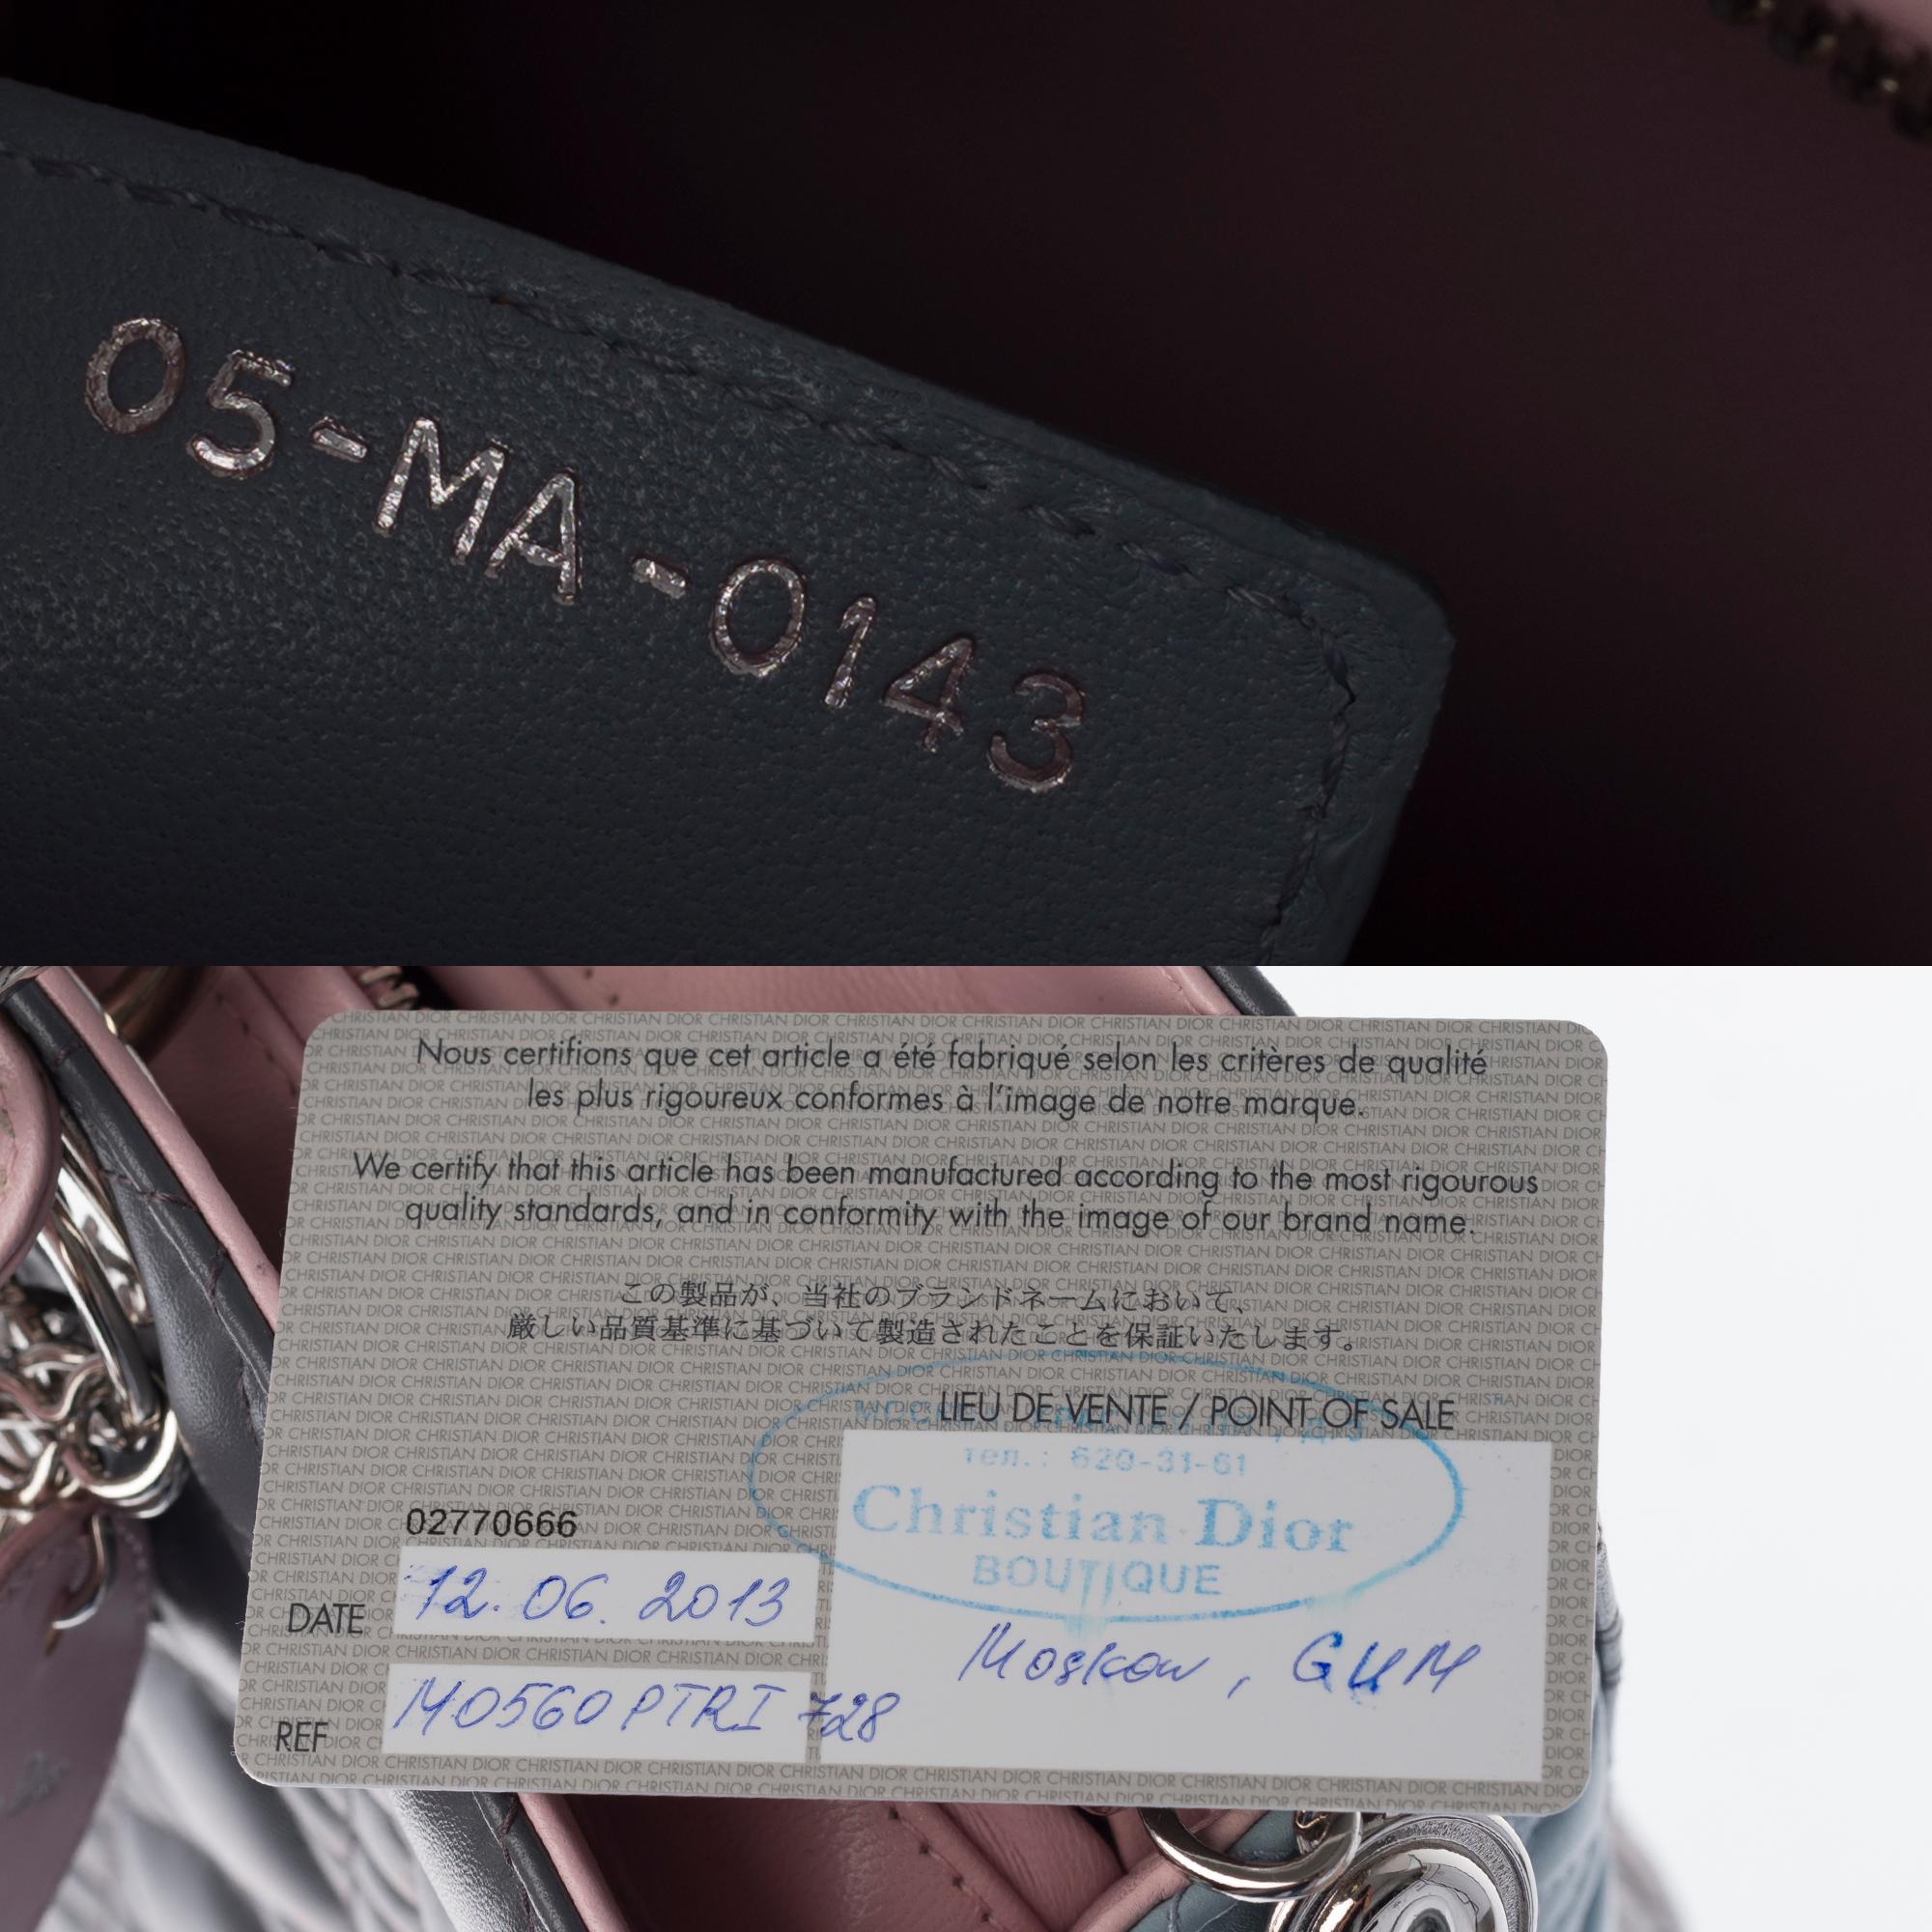 Gray Limited Edition Lady Dior (GM) tricolor in grey, pink, and turquoise leather, SHW